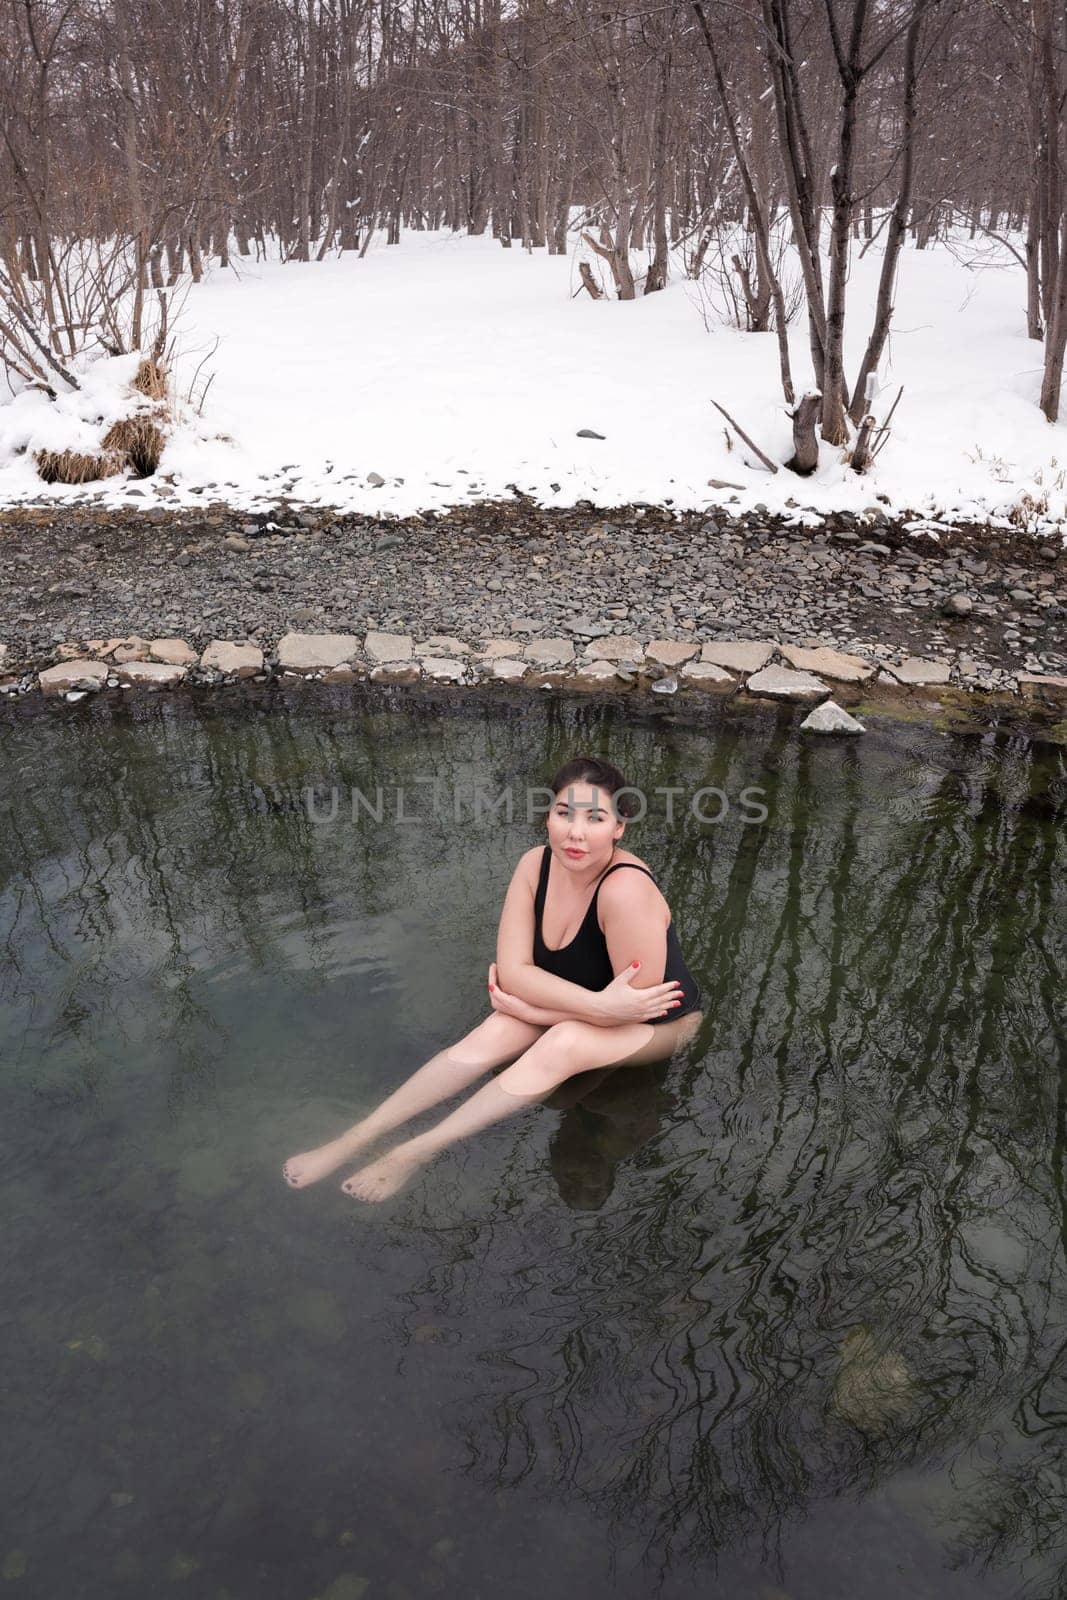 Large size young adult model in black one-piece bathing swimsuit sitting in geothermal mineral water in outdoors pool at balneotherapy spa, hot springs resort. Woman takes winter bathing and hardening